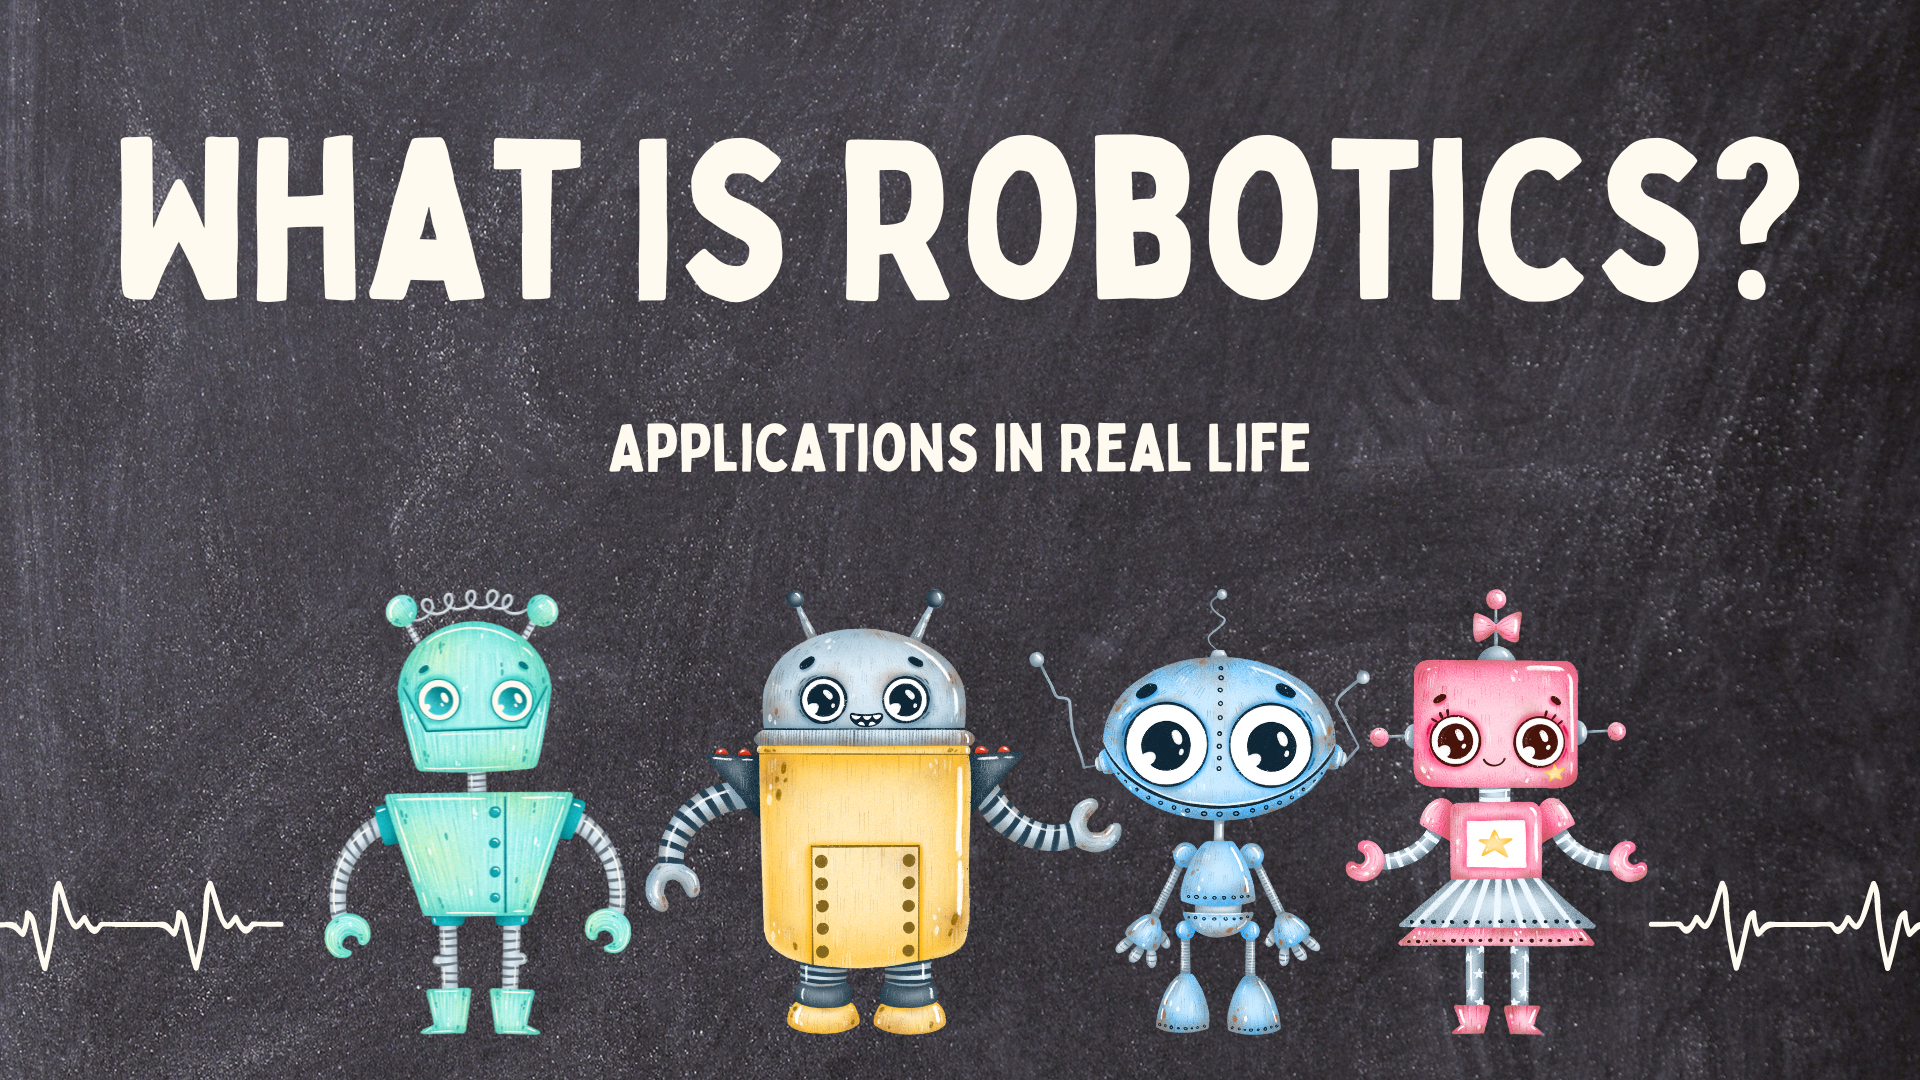 Robotics: What Is Robotics? History, Uses, Types, & Facts Applications in Real Life